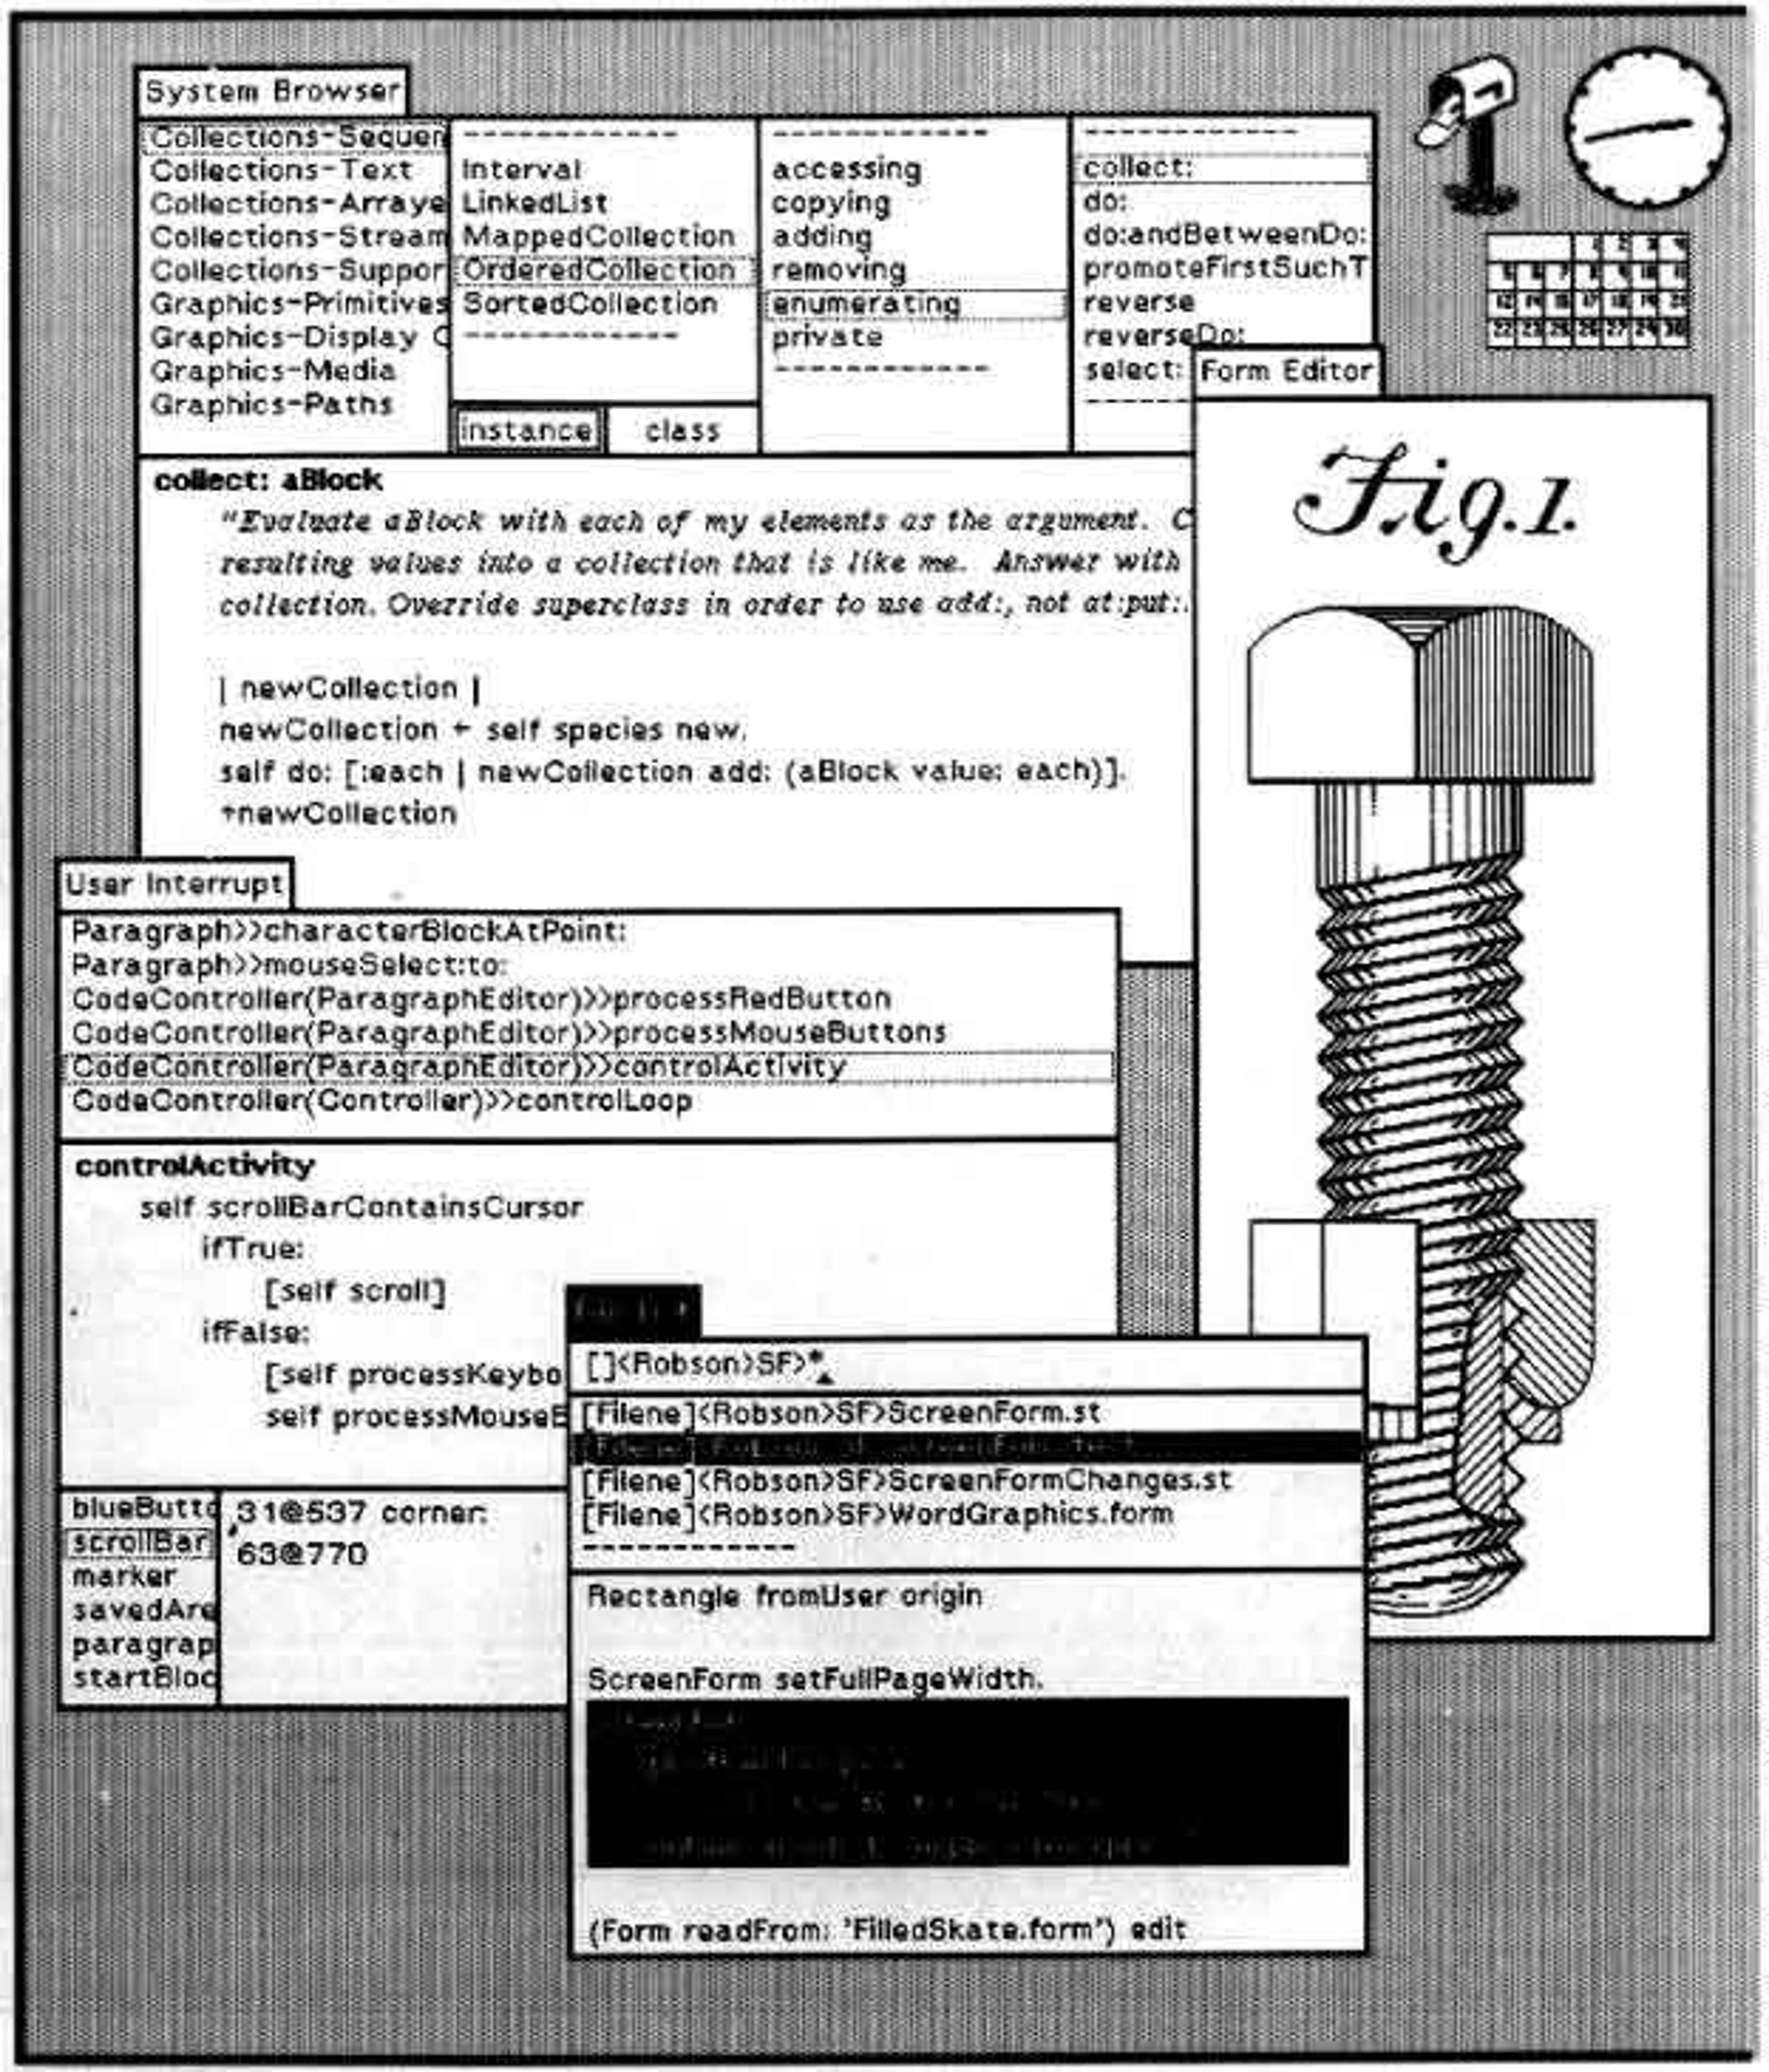 Screenshot of Xerox Alto interface, showing various windows, text and images. A figure of a screwdriver is shown in bitmaps.